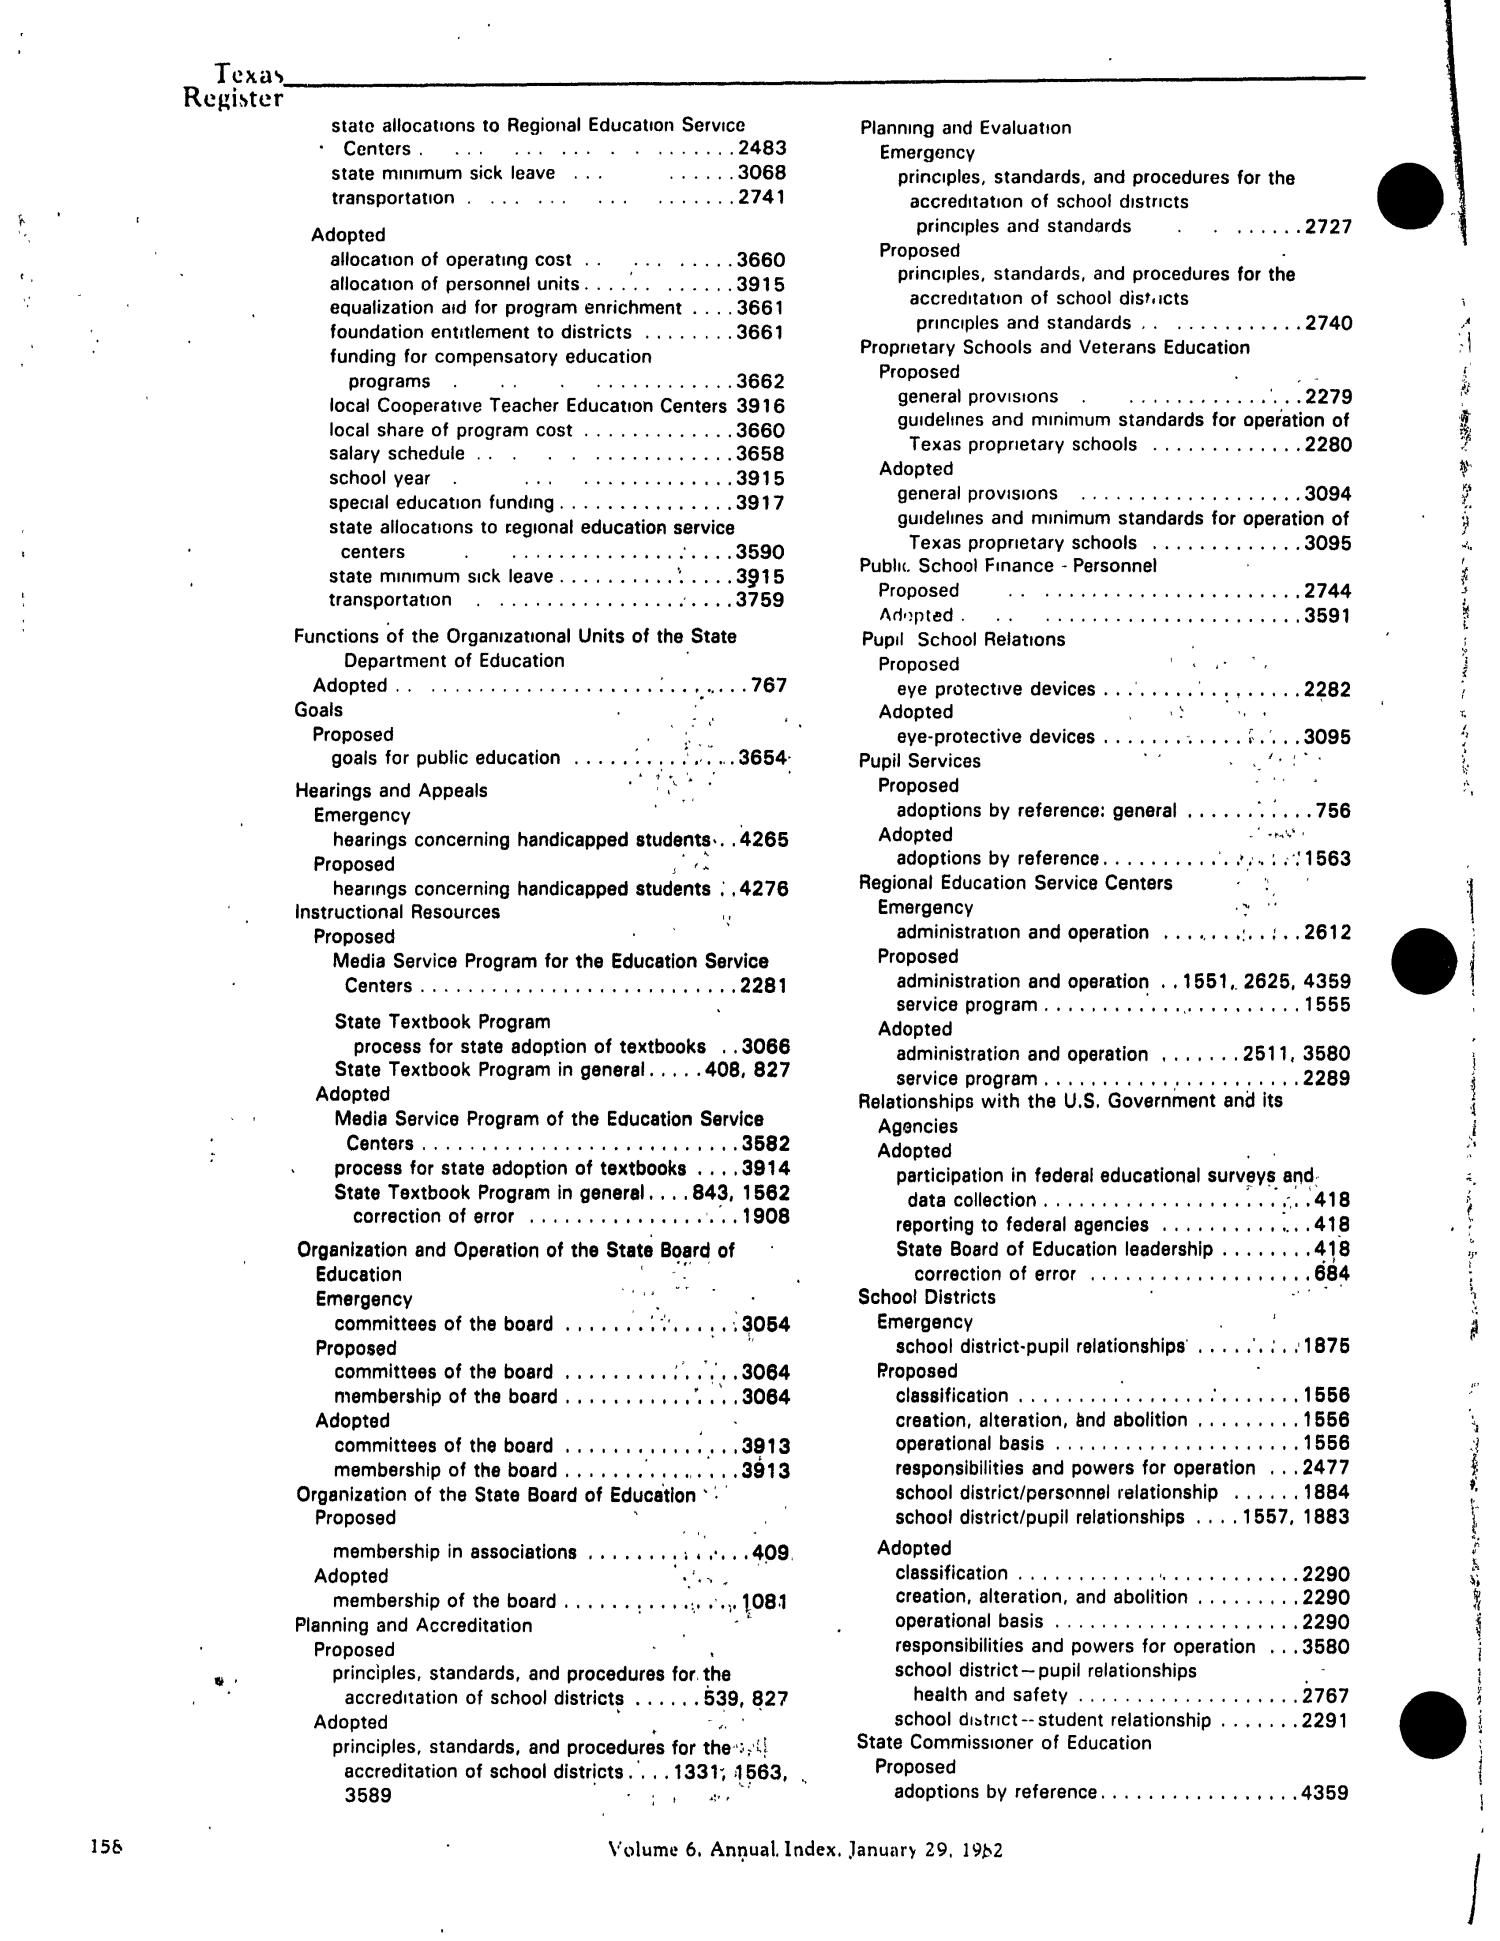 Texas Register, Volume 6, Annual Index, Pages 137-235, January 29, 1981
                                                
                                                    158
                                                